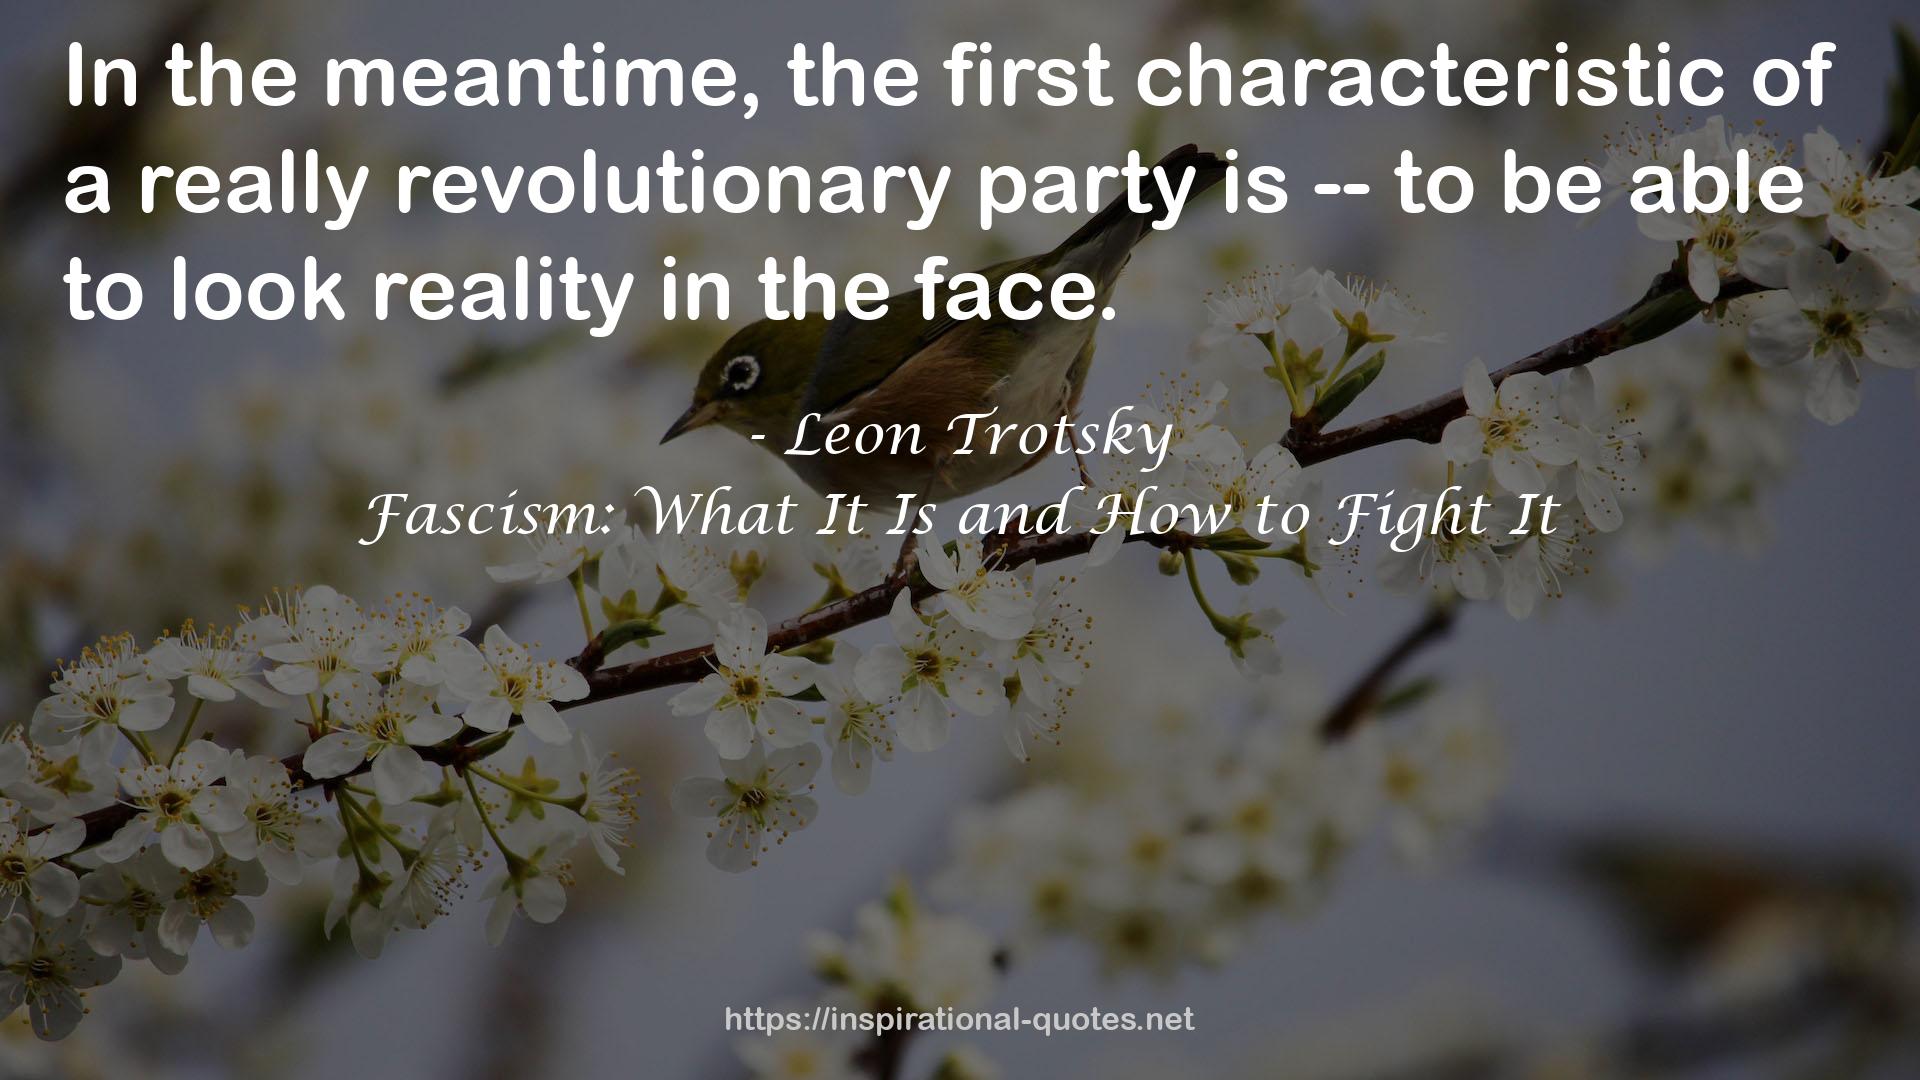 Fascism: What It Is and How to Fight It QUOTES